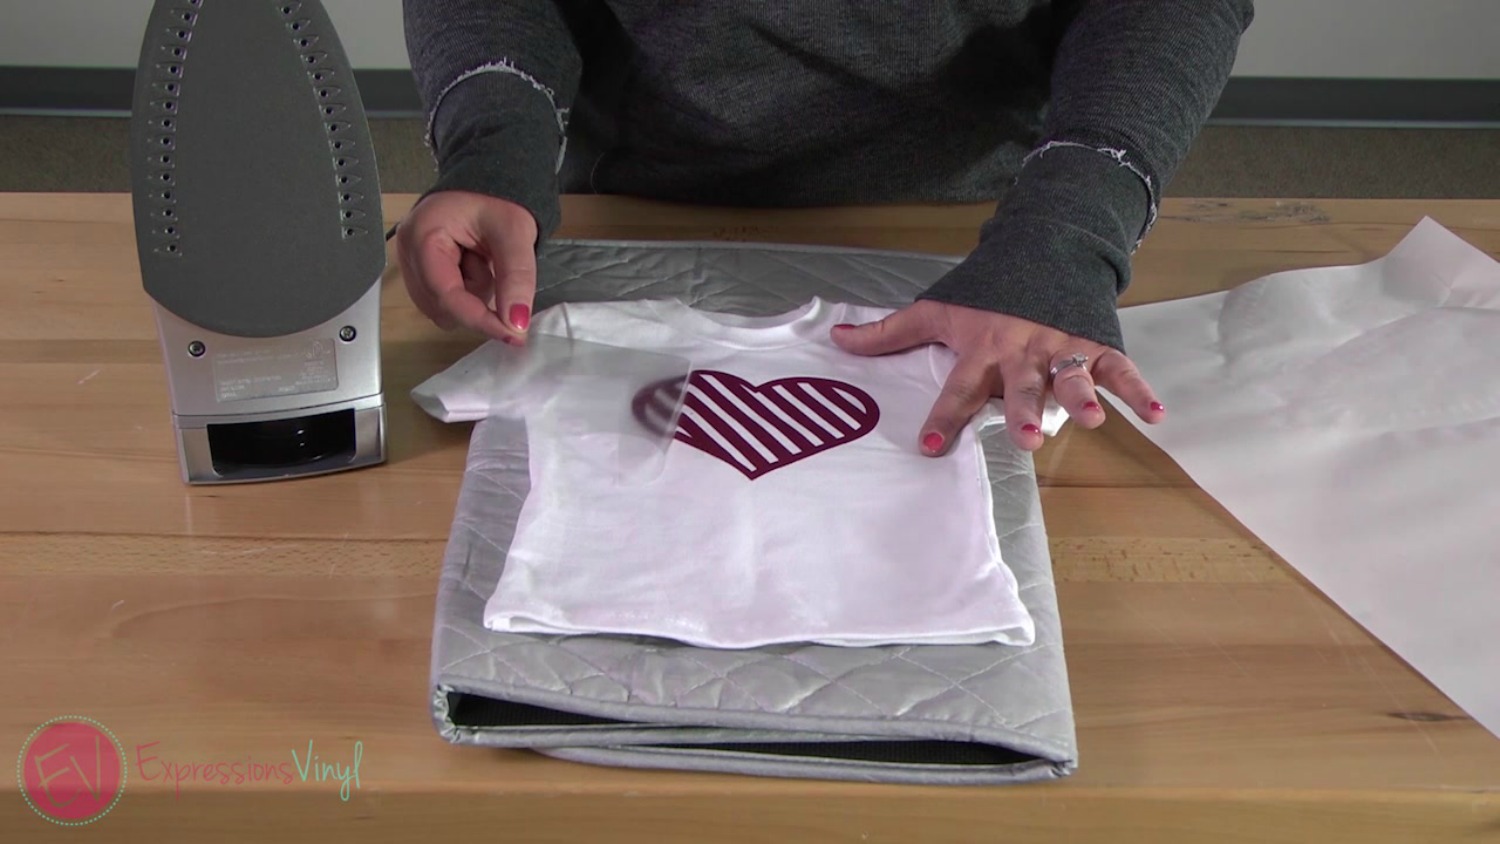 Heating Up: Using An Iron To Apply Heat Transfer Vinyl - Expressions Vinyl